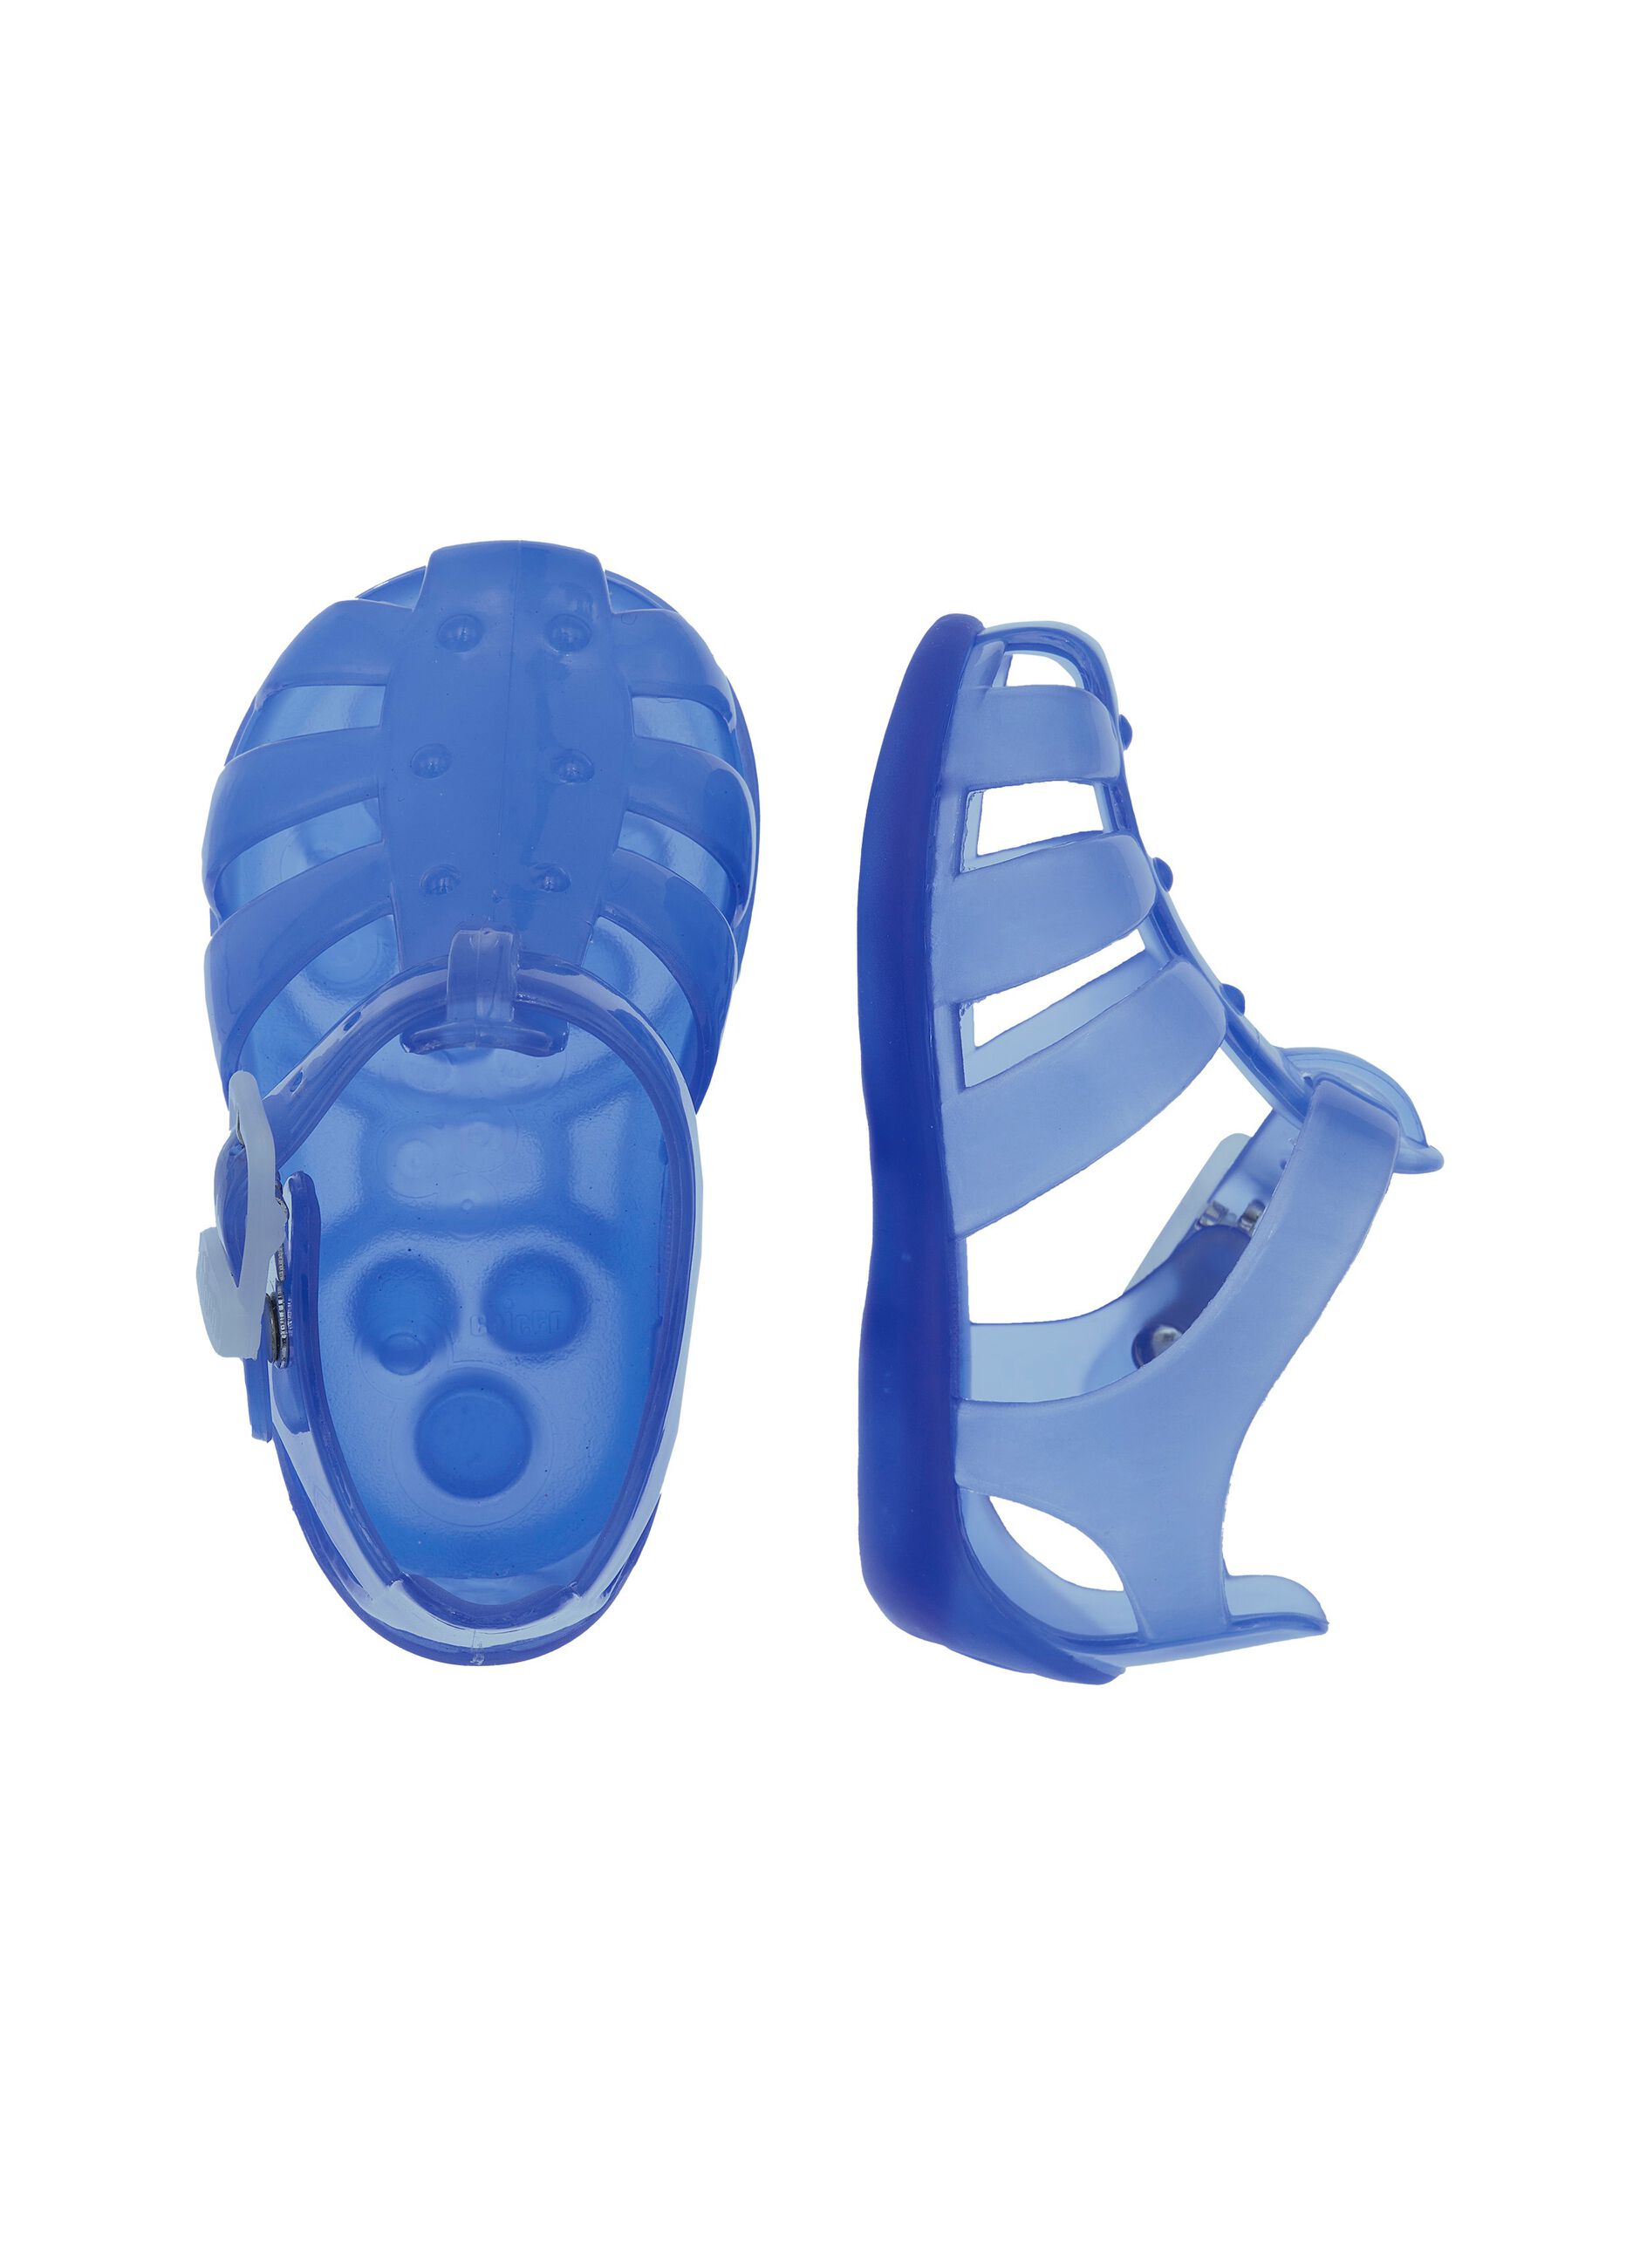 Moon sandals in rubber